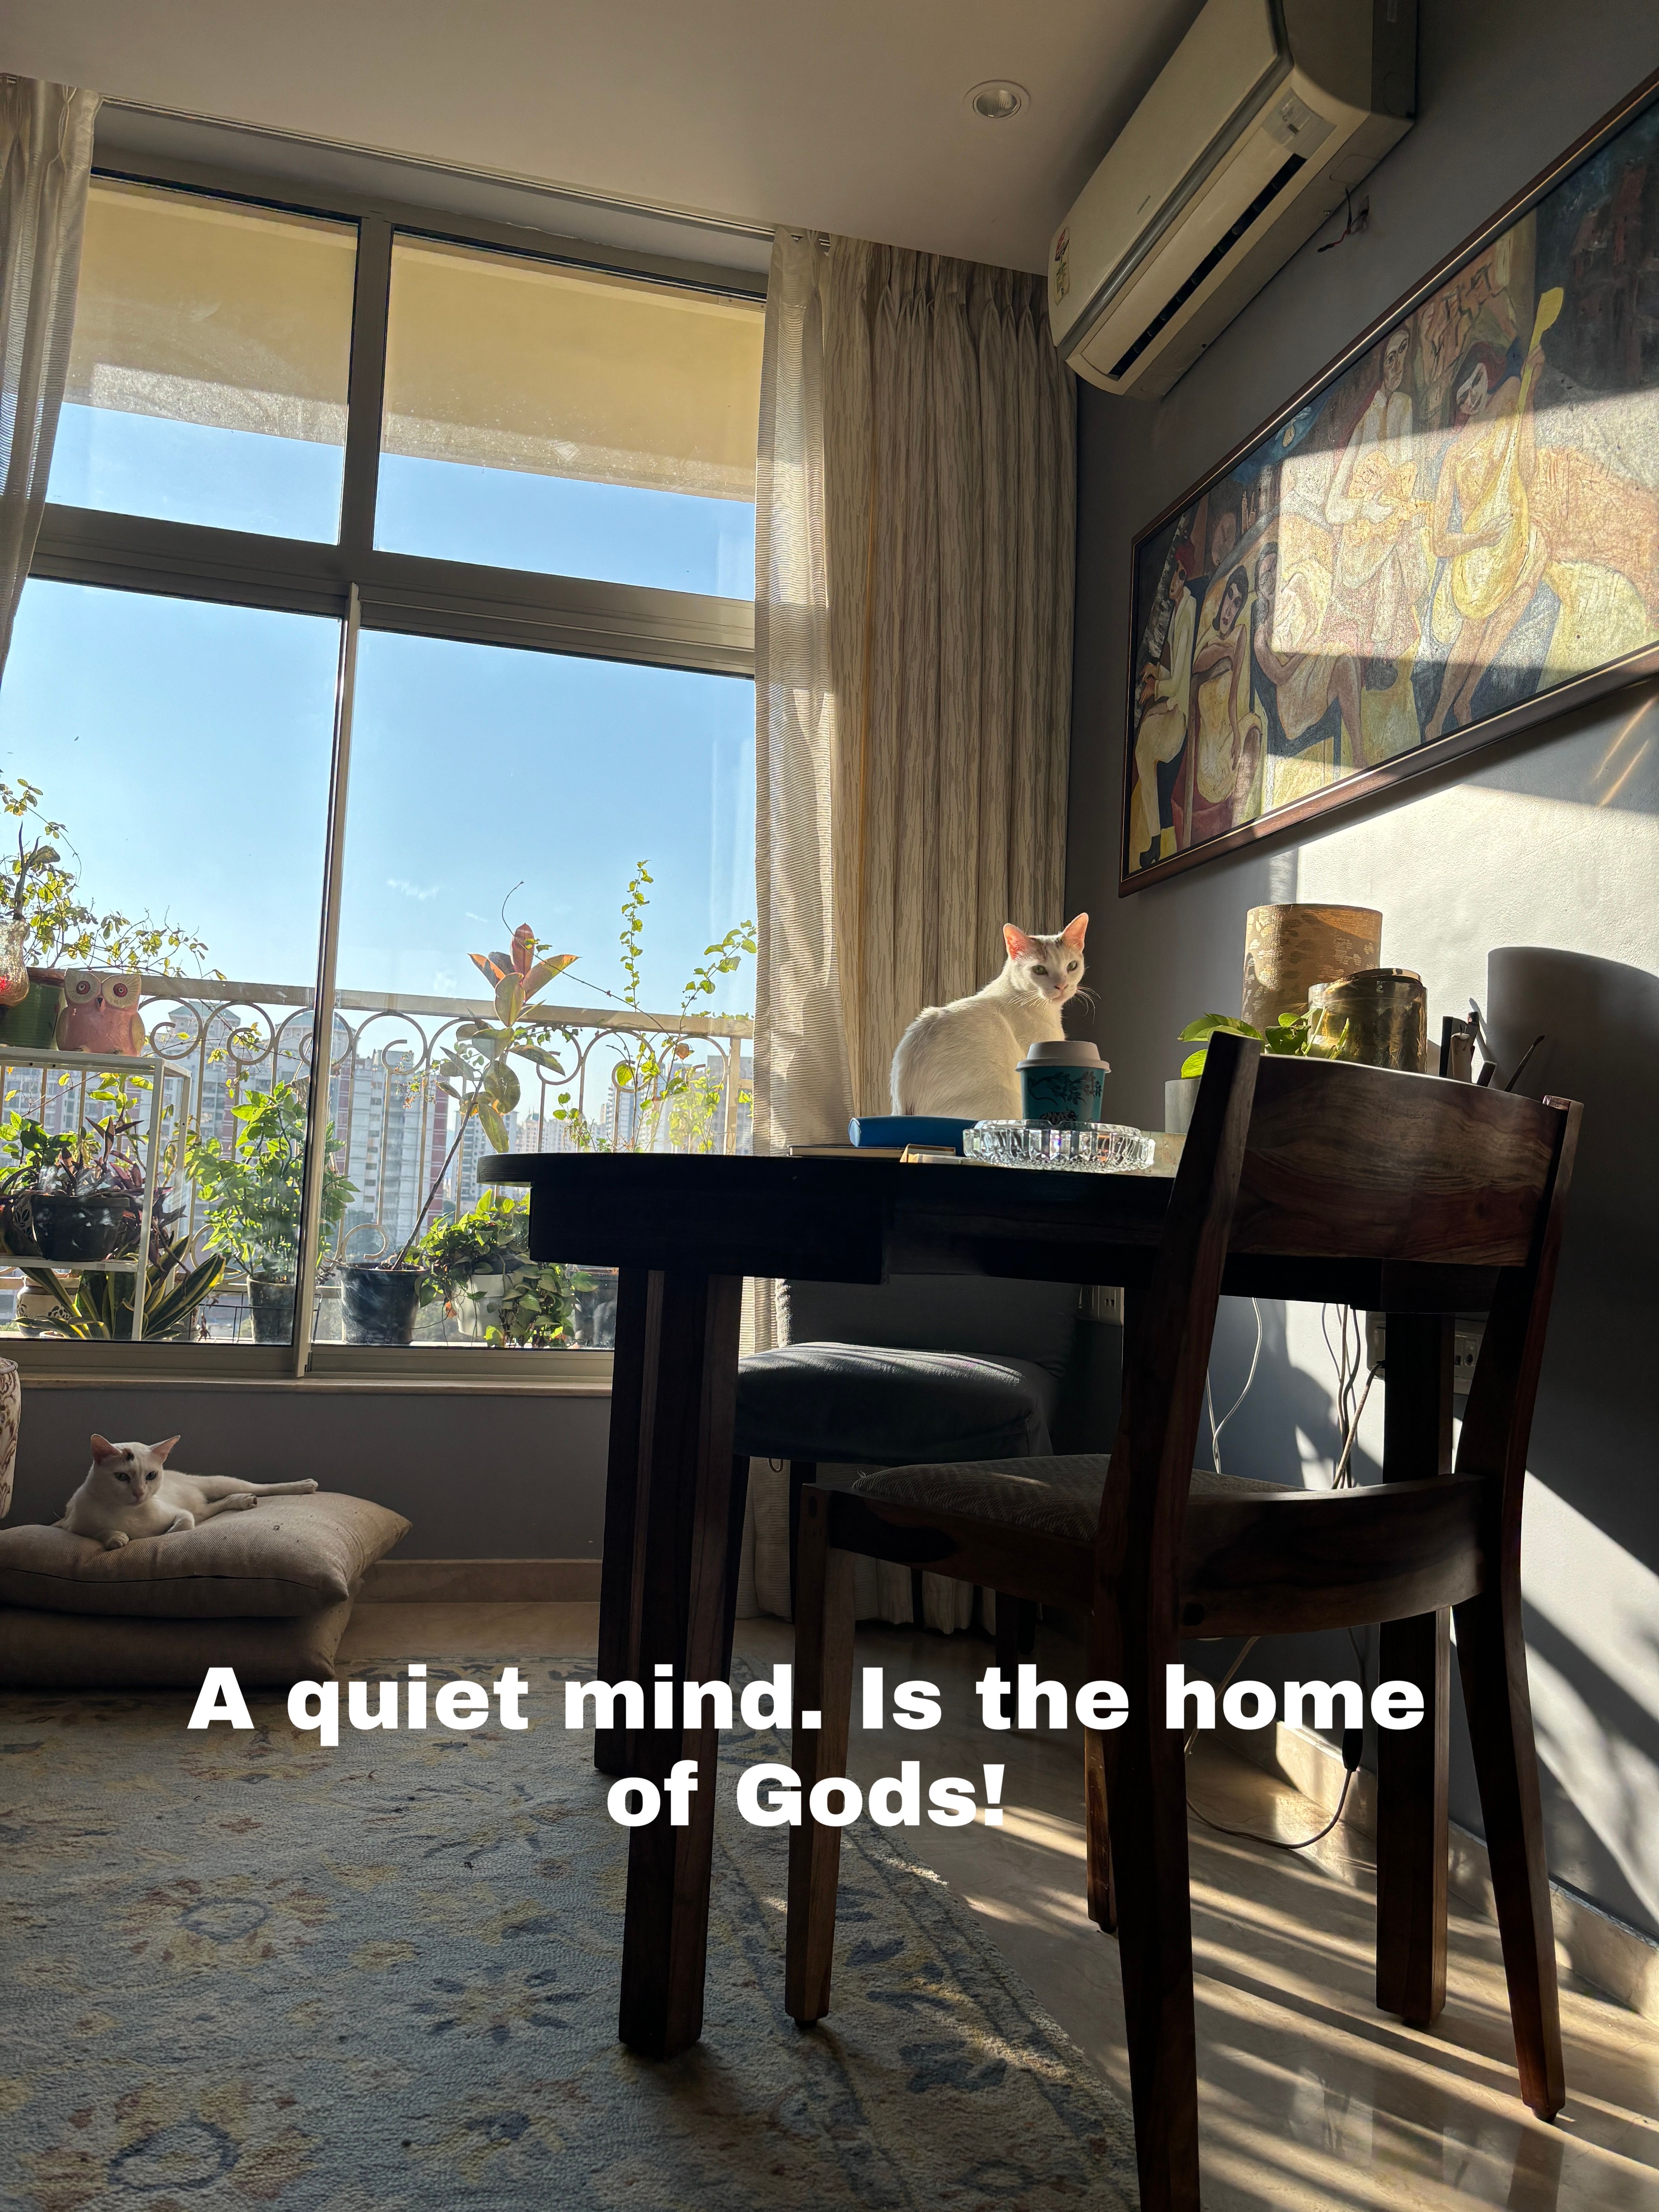 The older i am growing, the heavier is the weight of words. A quiet mind, is the Home of Gods.